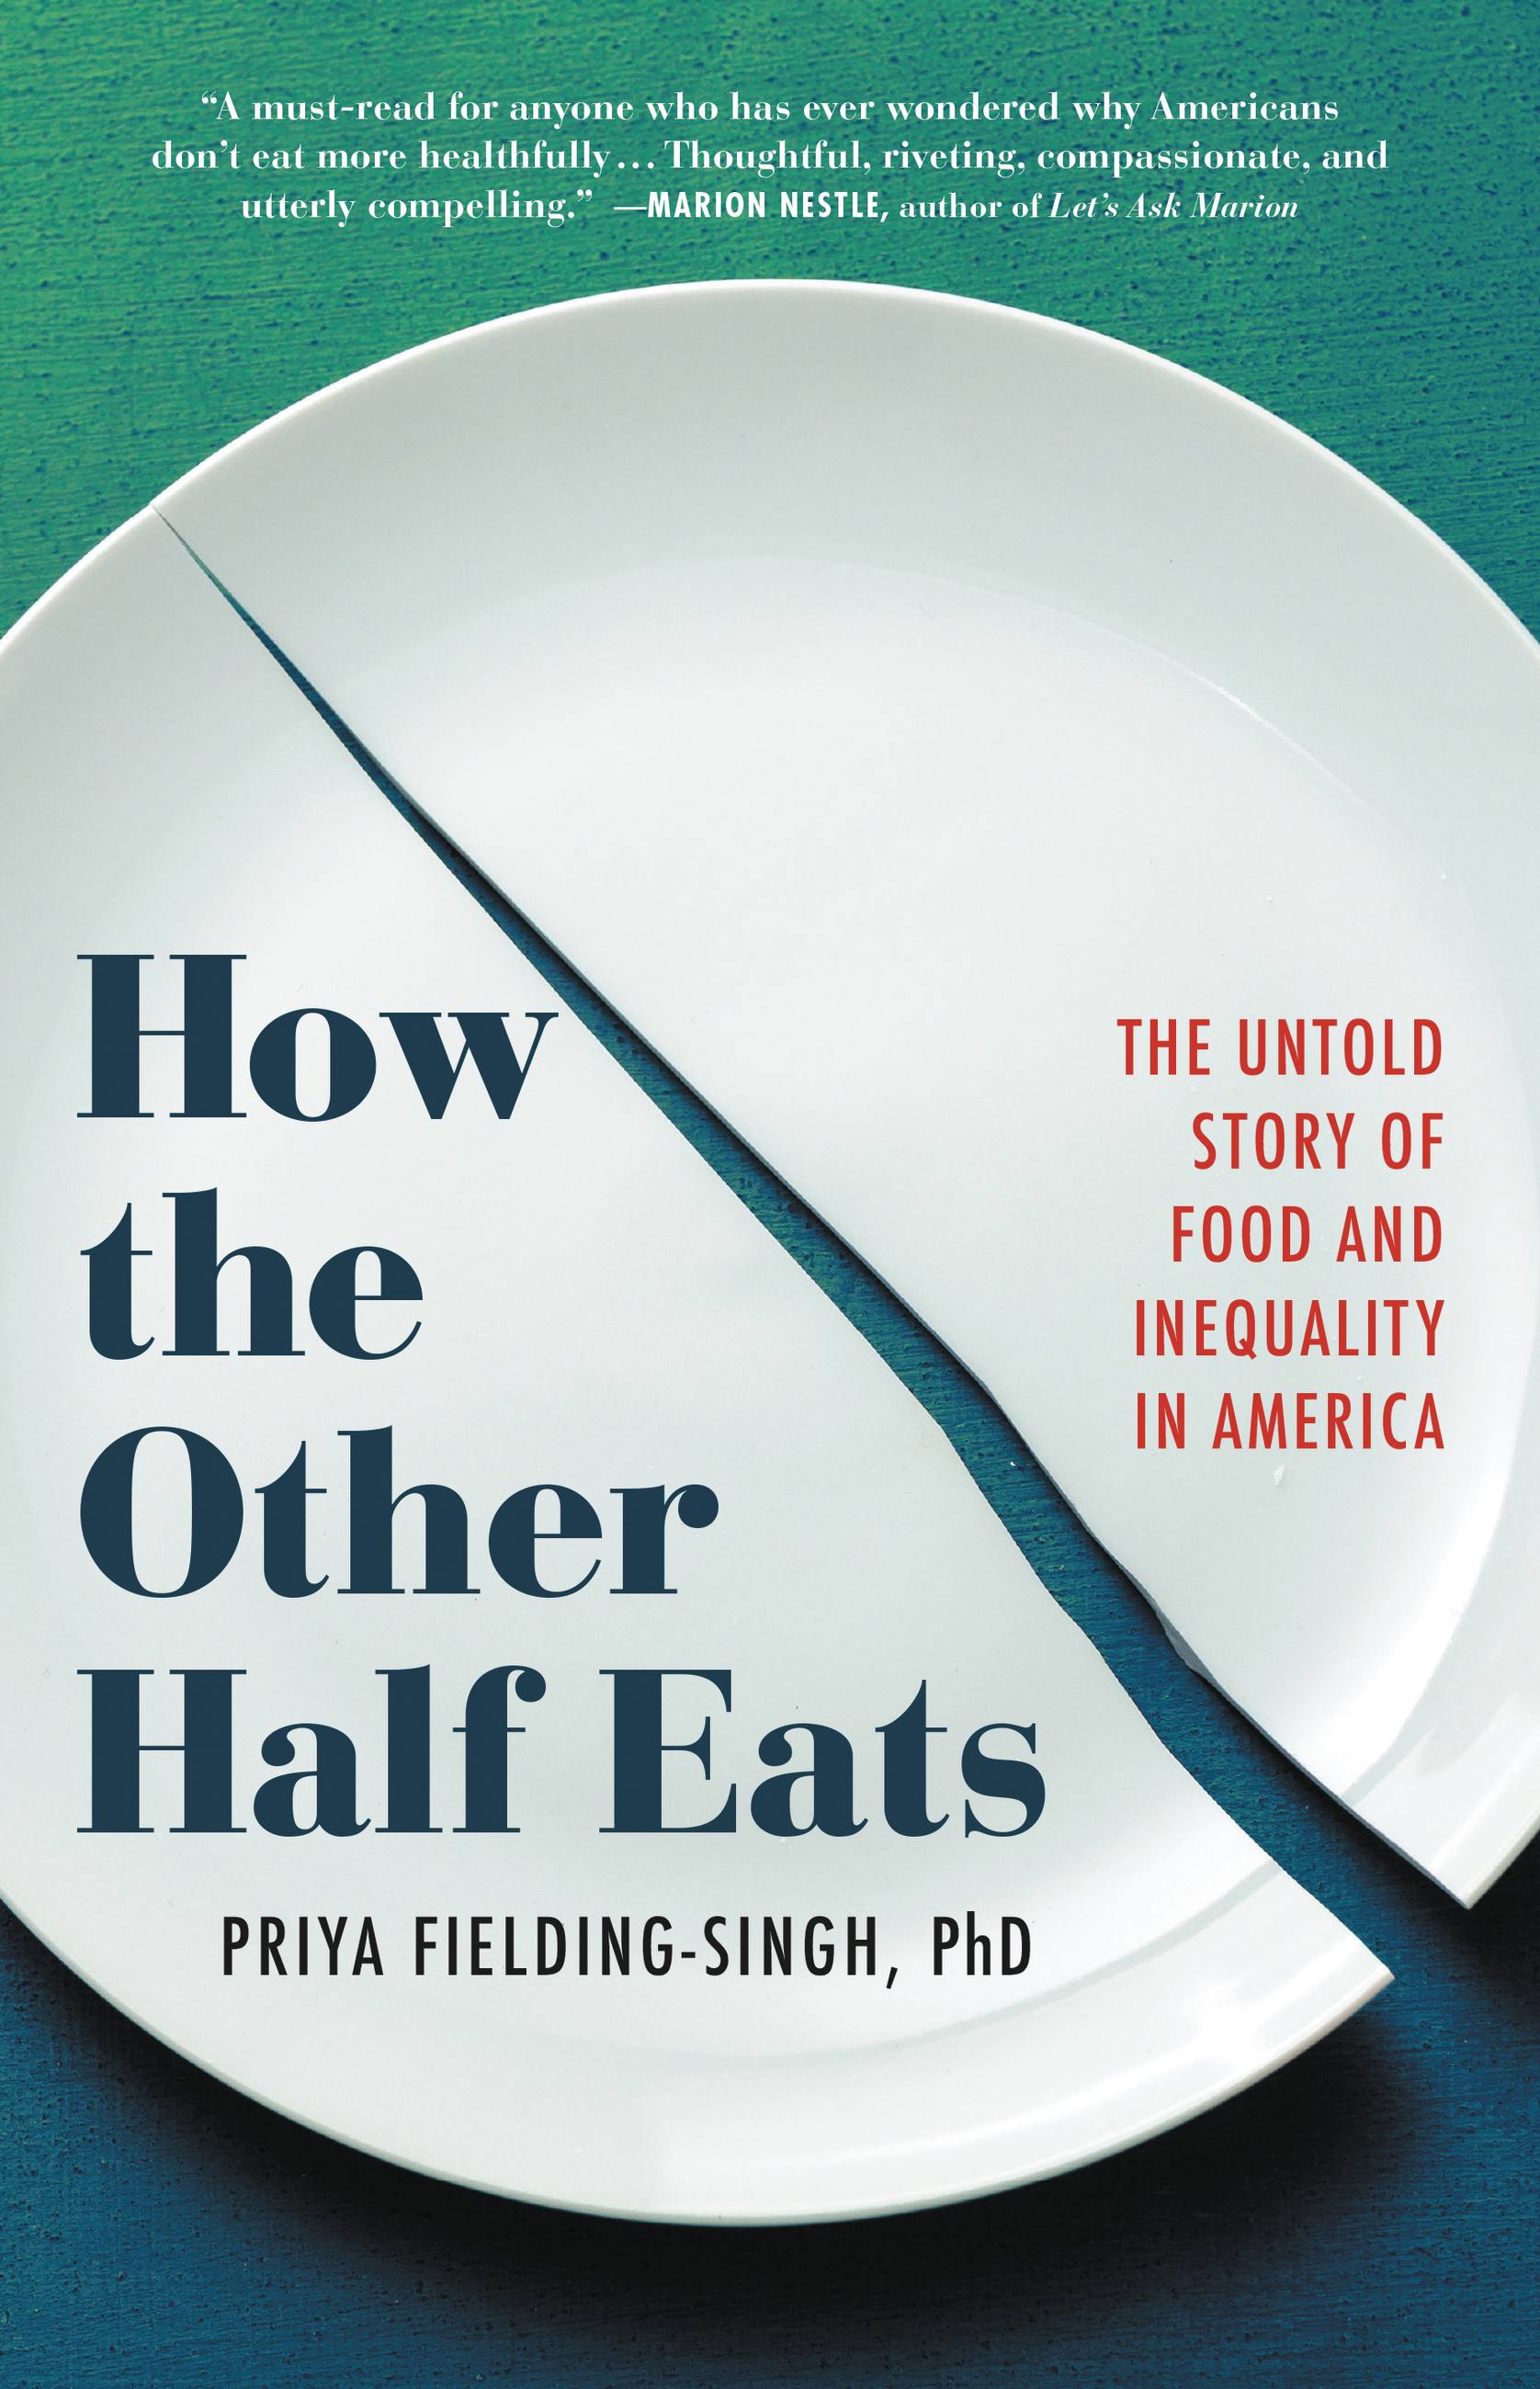 How the Other Half Eats by Priya Fielding-Singh, PhD Hachette Book Group image picture